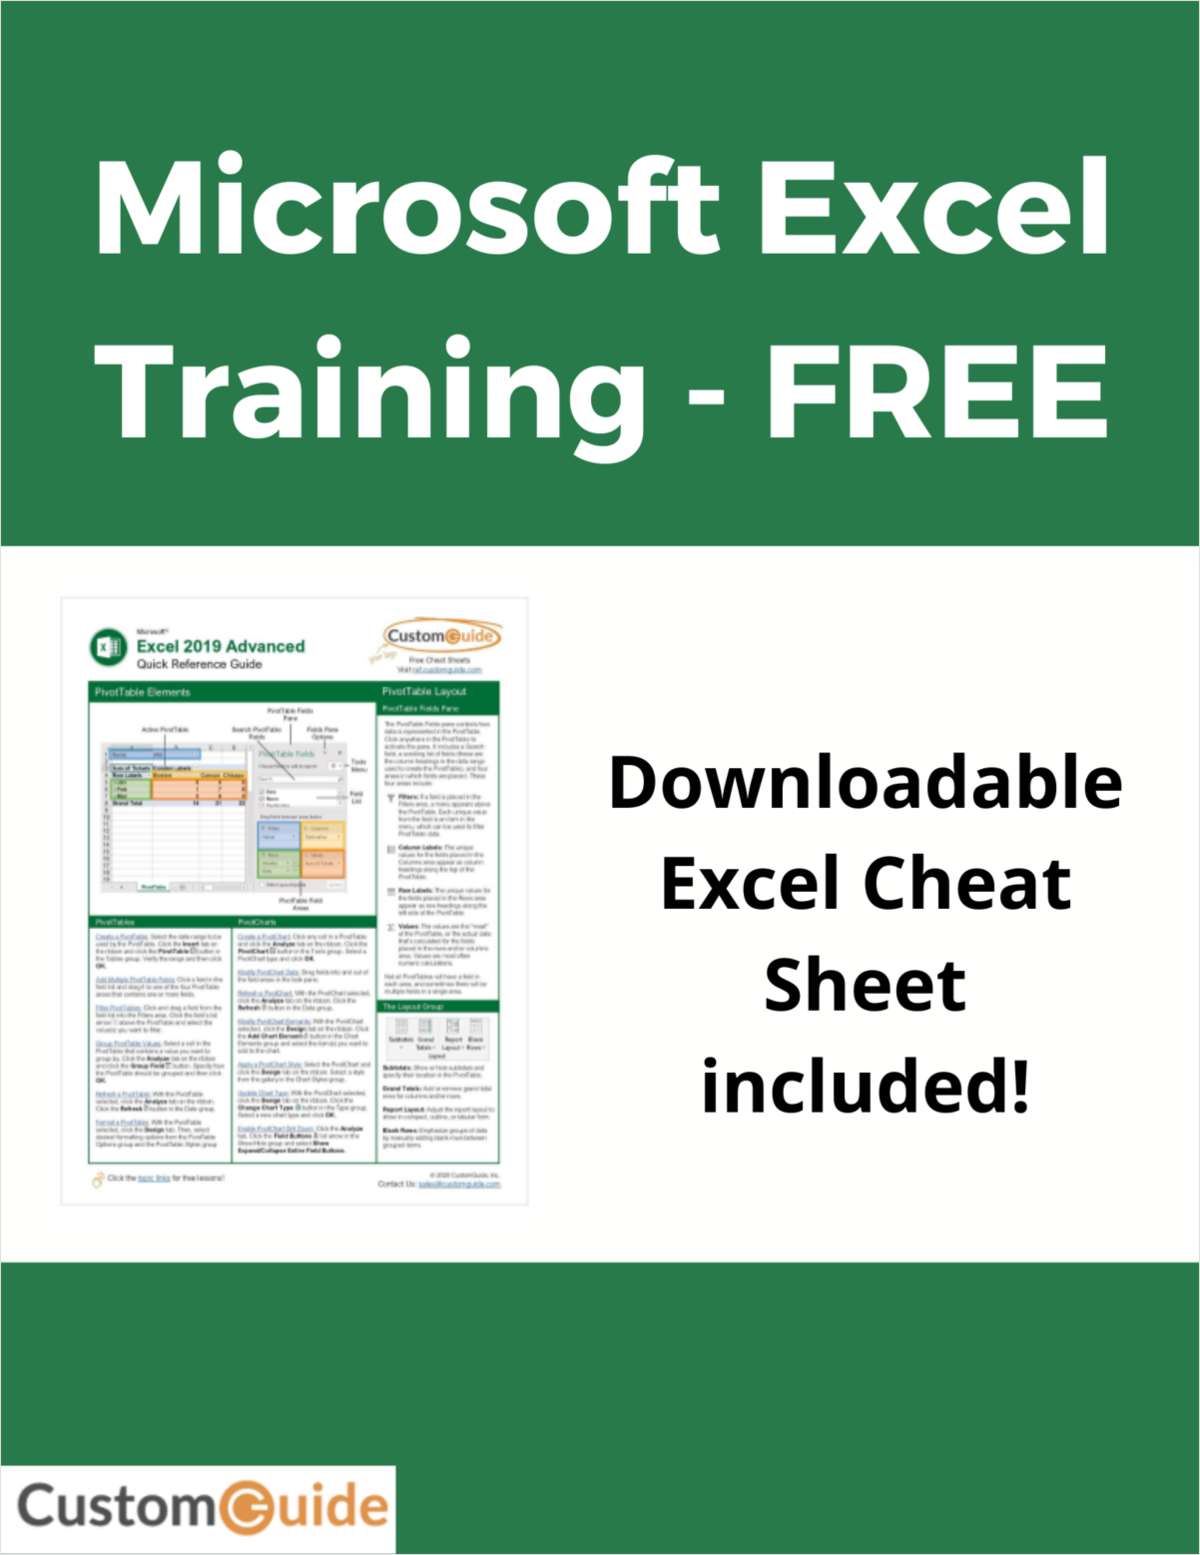 Microsoft Excel Training Course - FREE